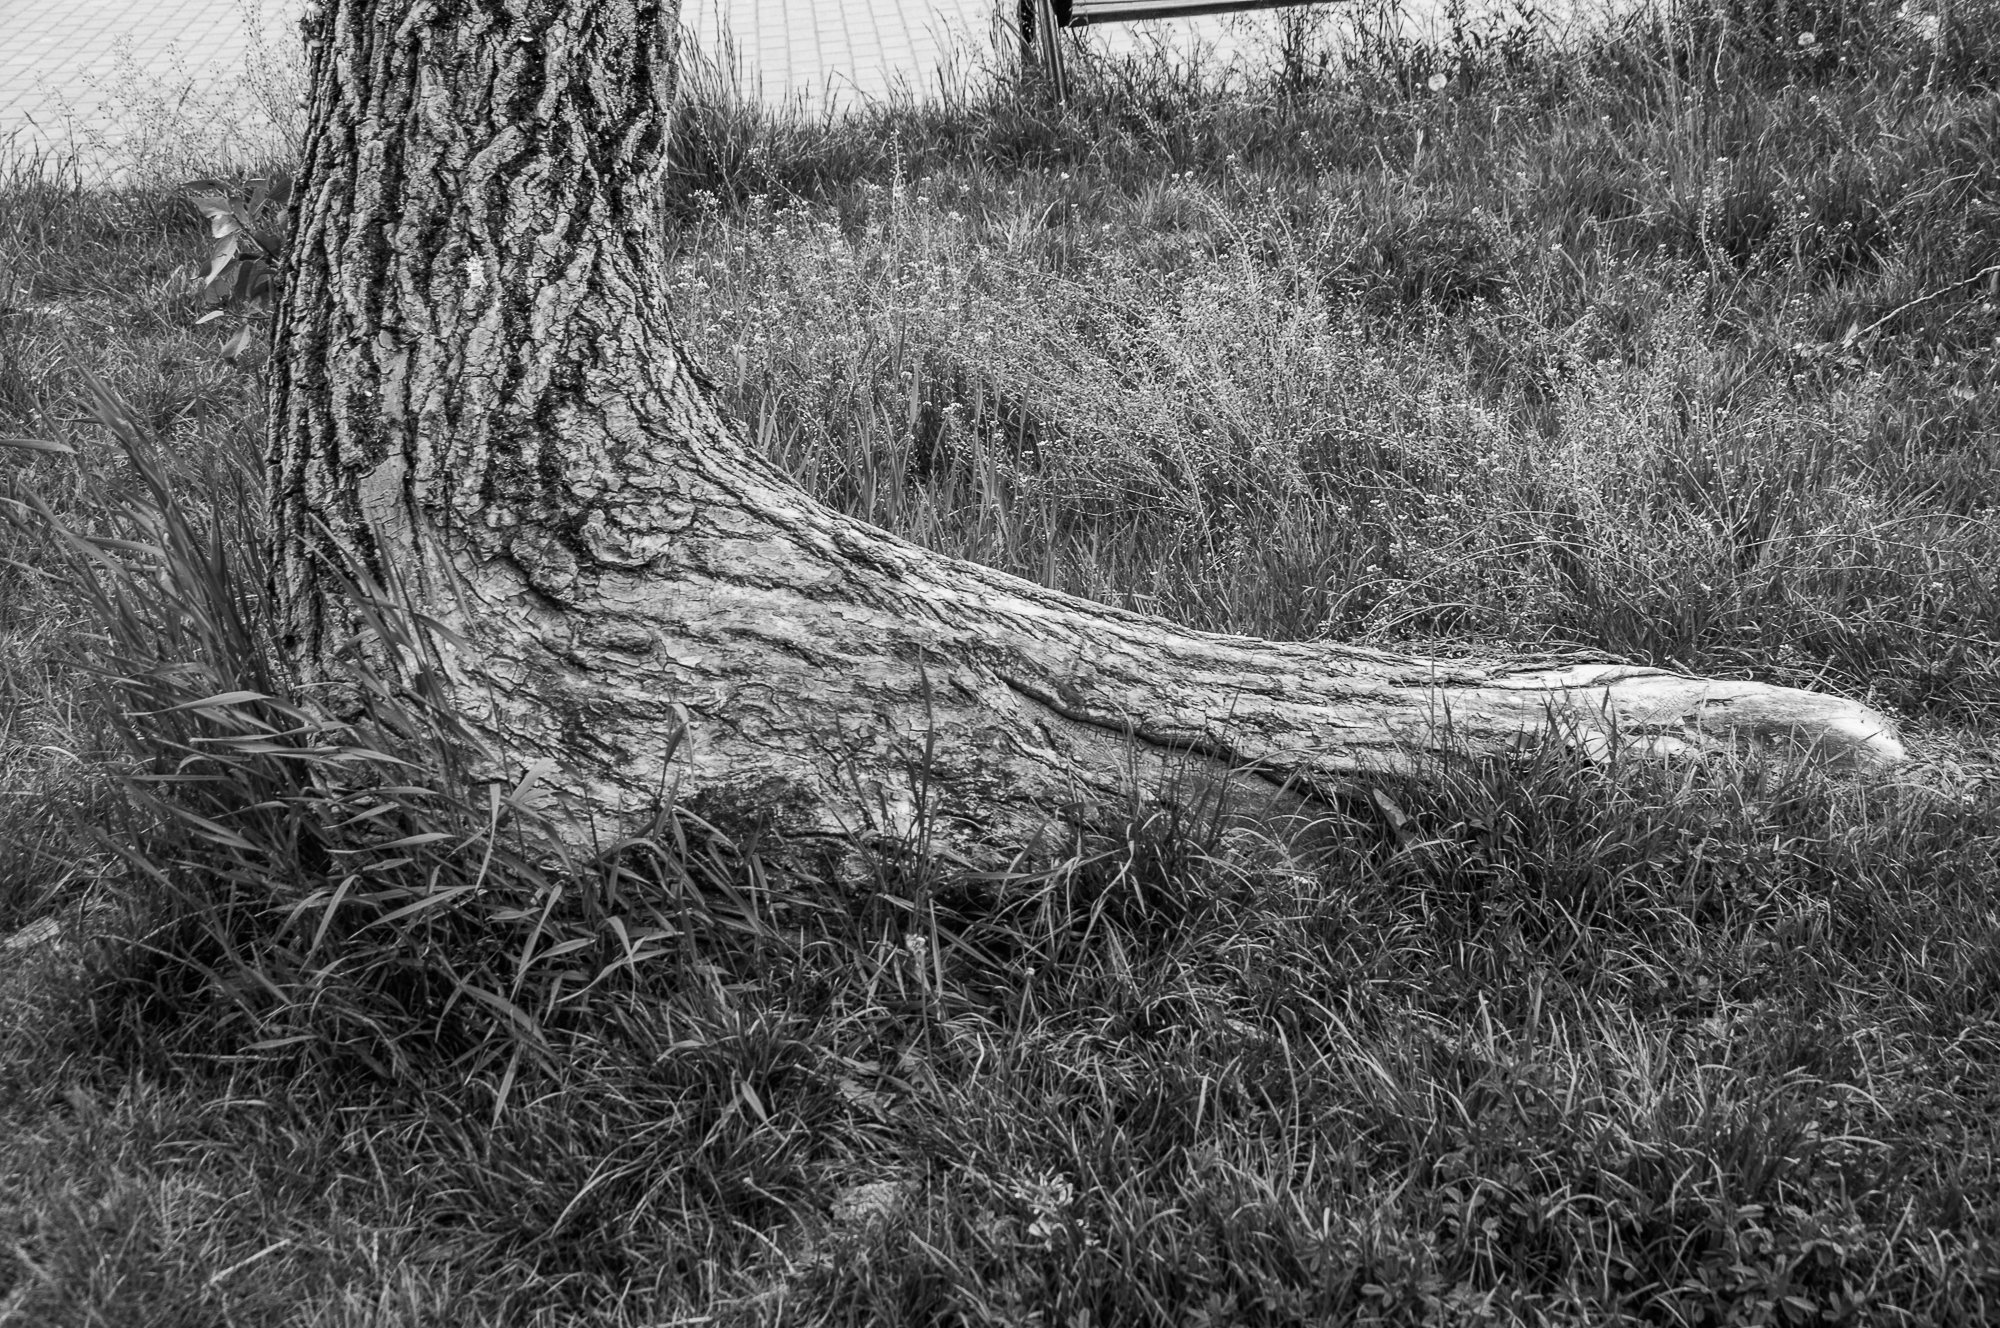 Adam Mazek Photography Warsaw (Warszawa) 2020. Post: "Pythagoreanism." Tree. Abstraction. Foot with a nail.